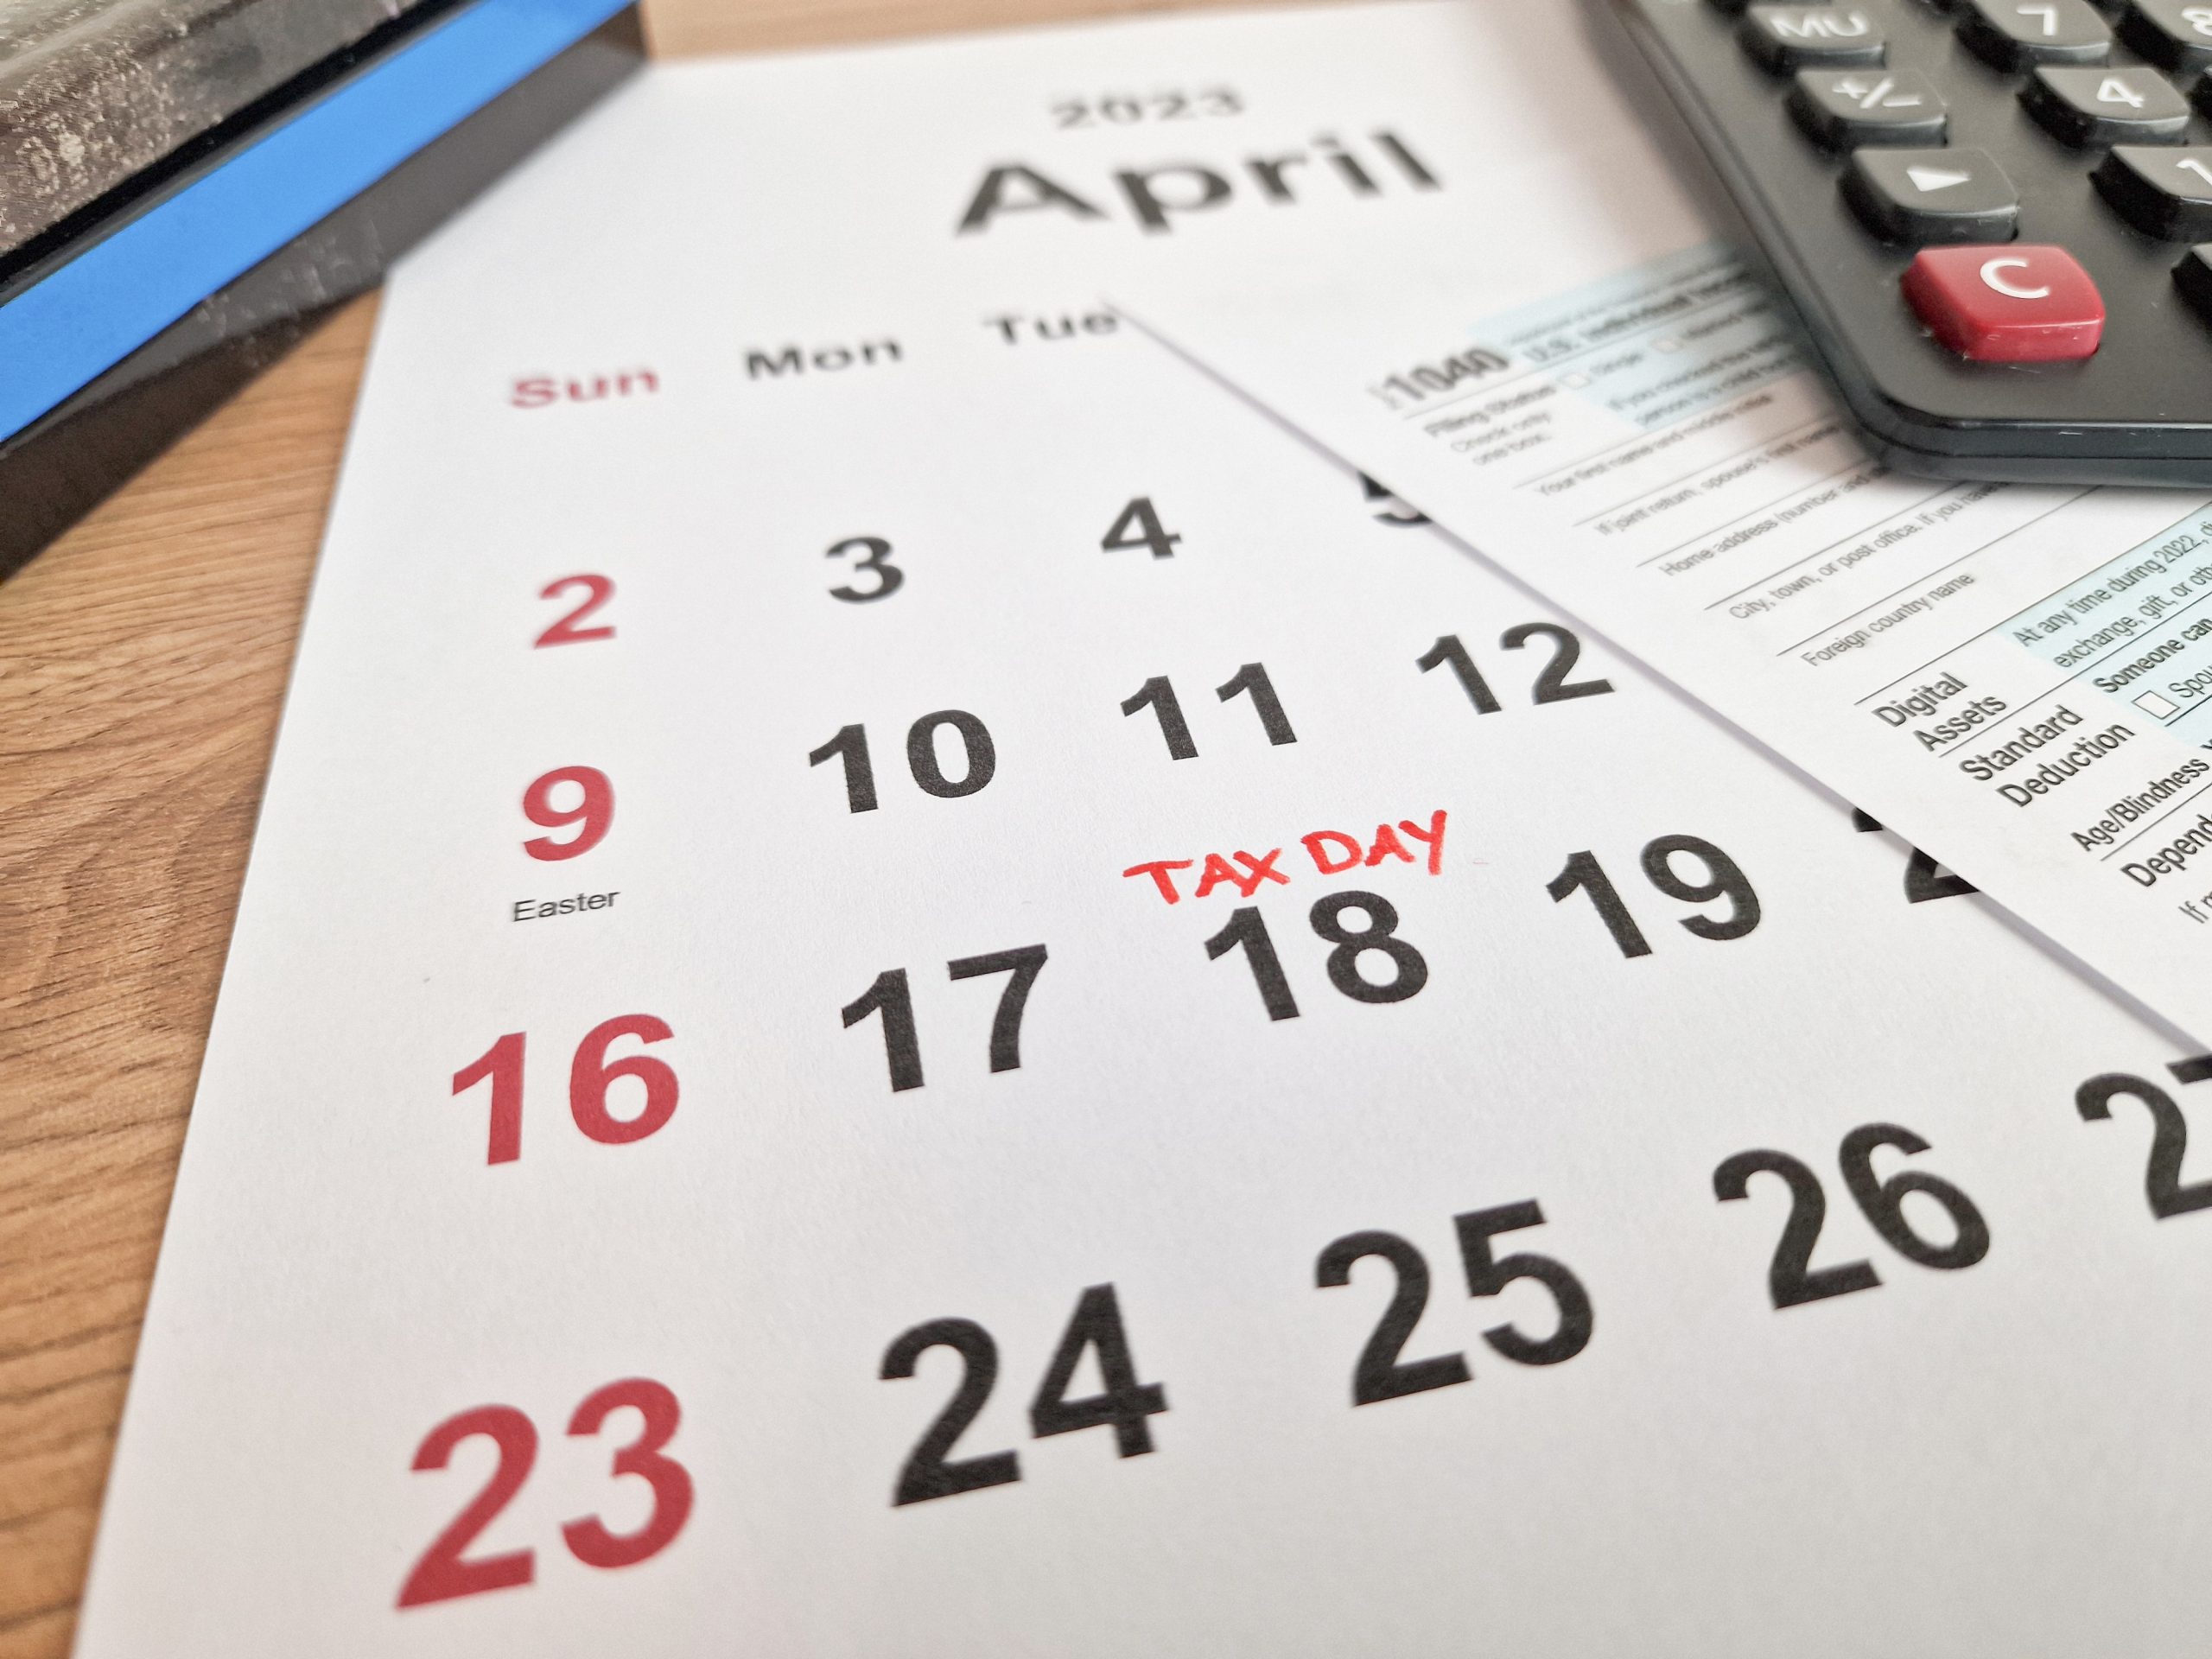 Tax payment day marked on a calendar - April 18, 2023 with 1040 form, financial concept